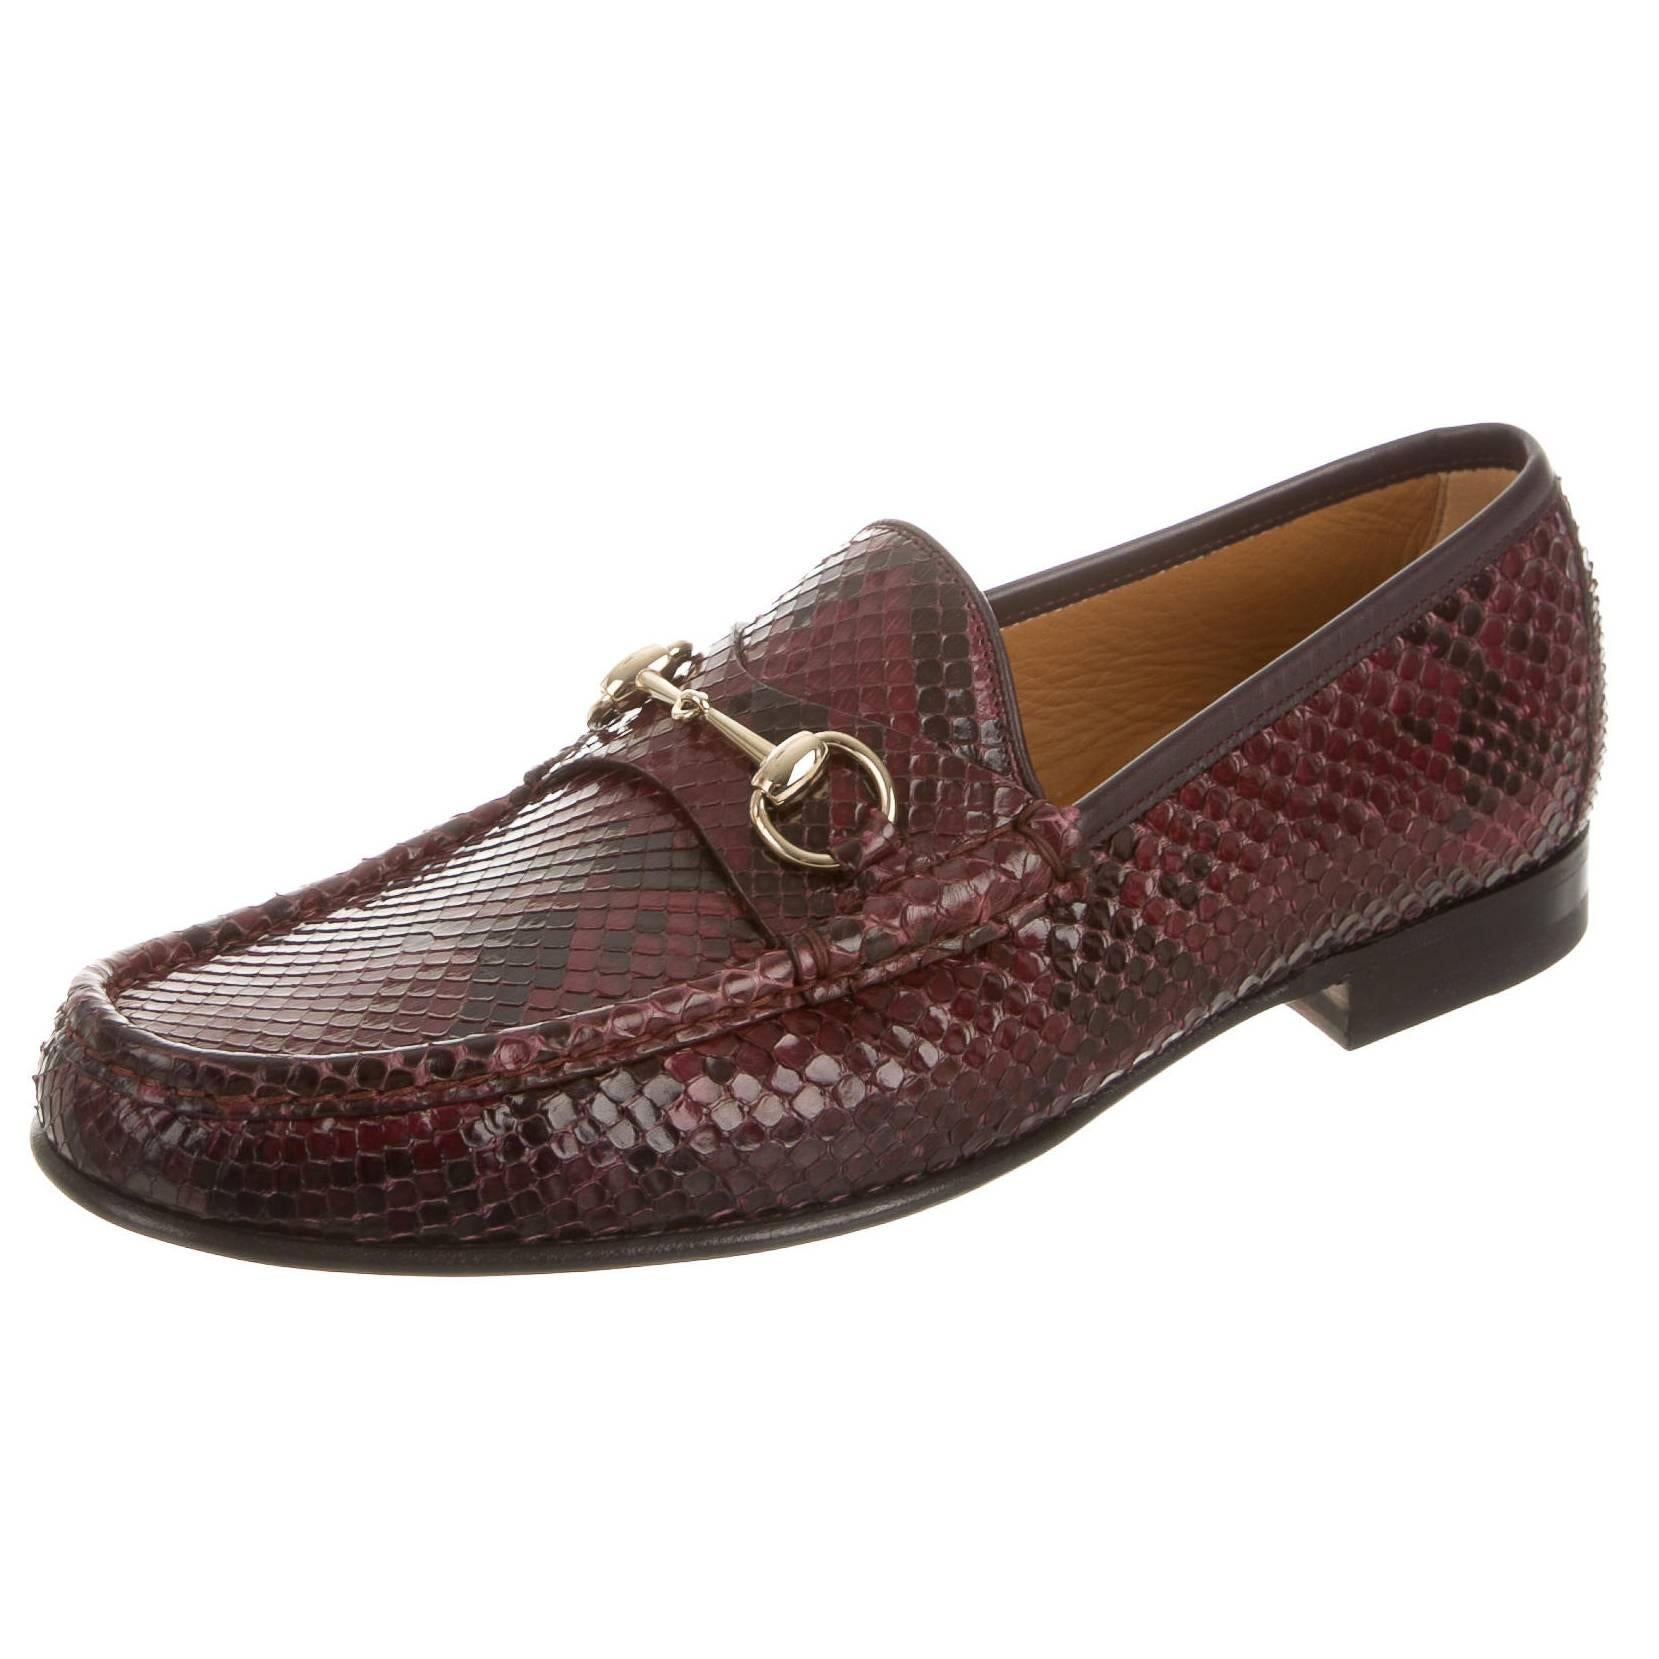 Gucci NEW Men's Snakeskin Leather Burgundy Flats Slippers Loafers Shoes in Box